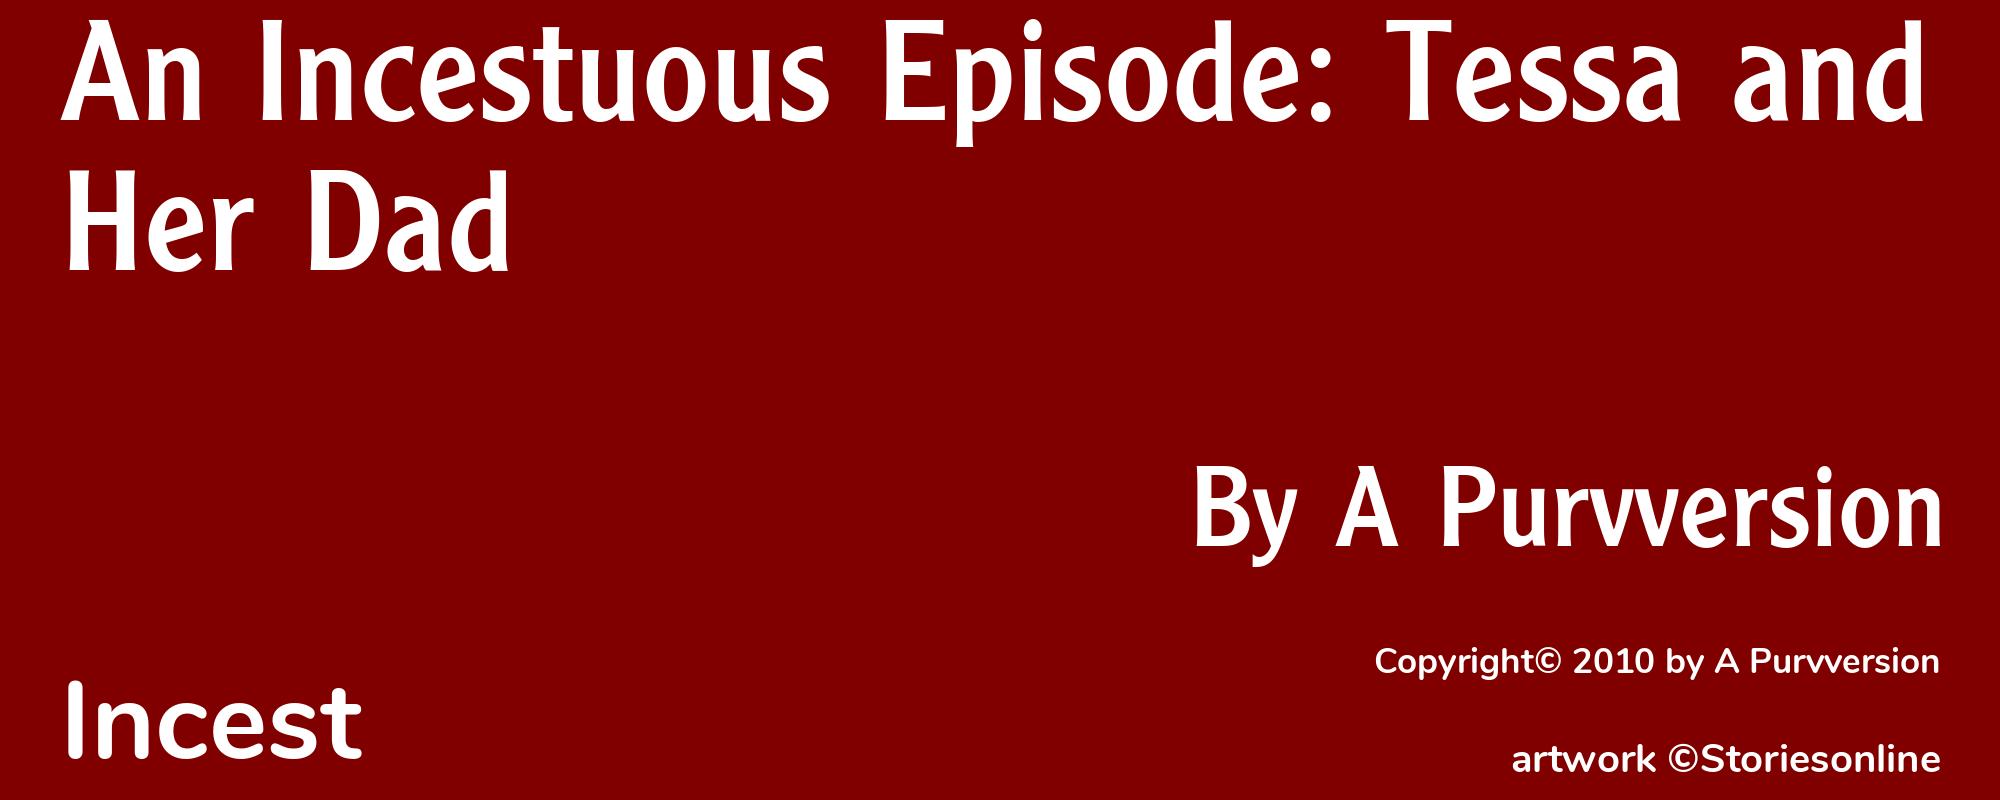 An Incestuous Episode: Tessa and Her Dad - Cover